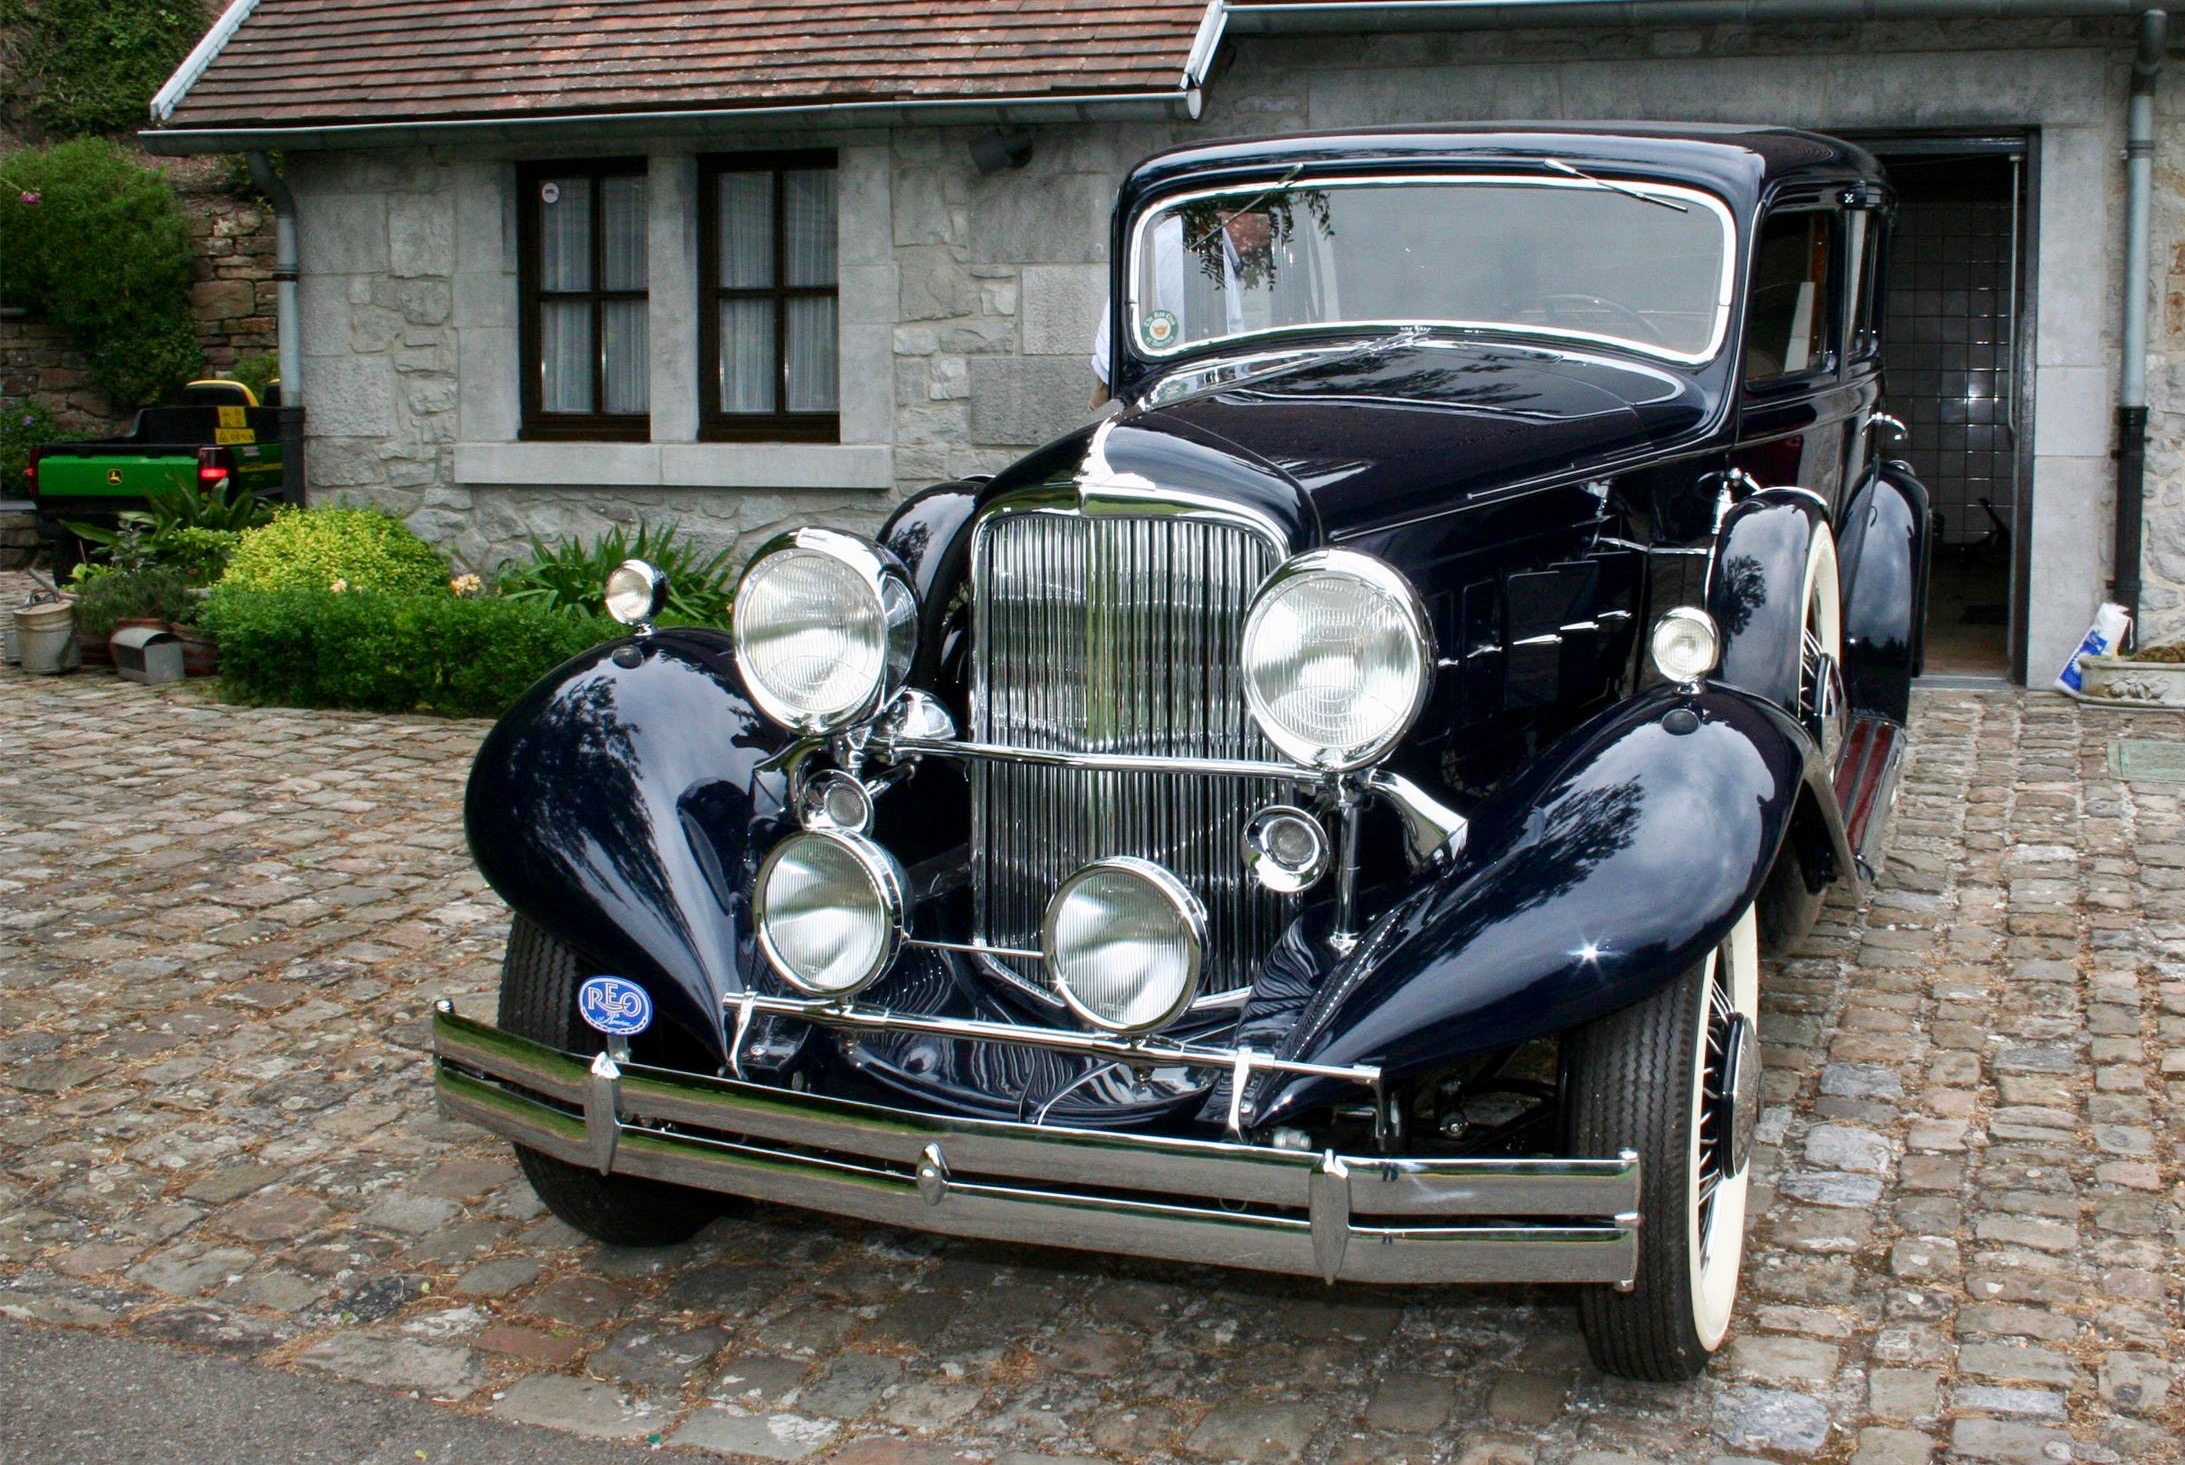 1931 REO Royale, 1931 REO Royale demonstrates global passion for collector cars, ClassicCars.com Journal